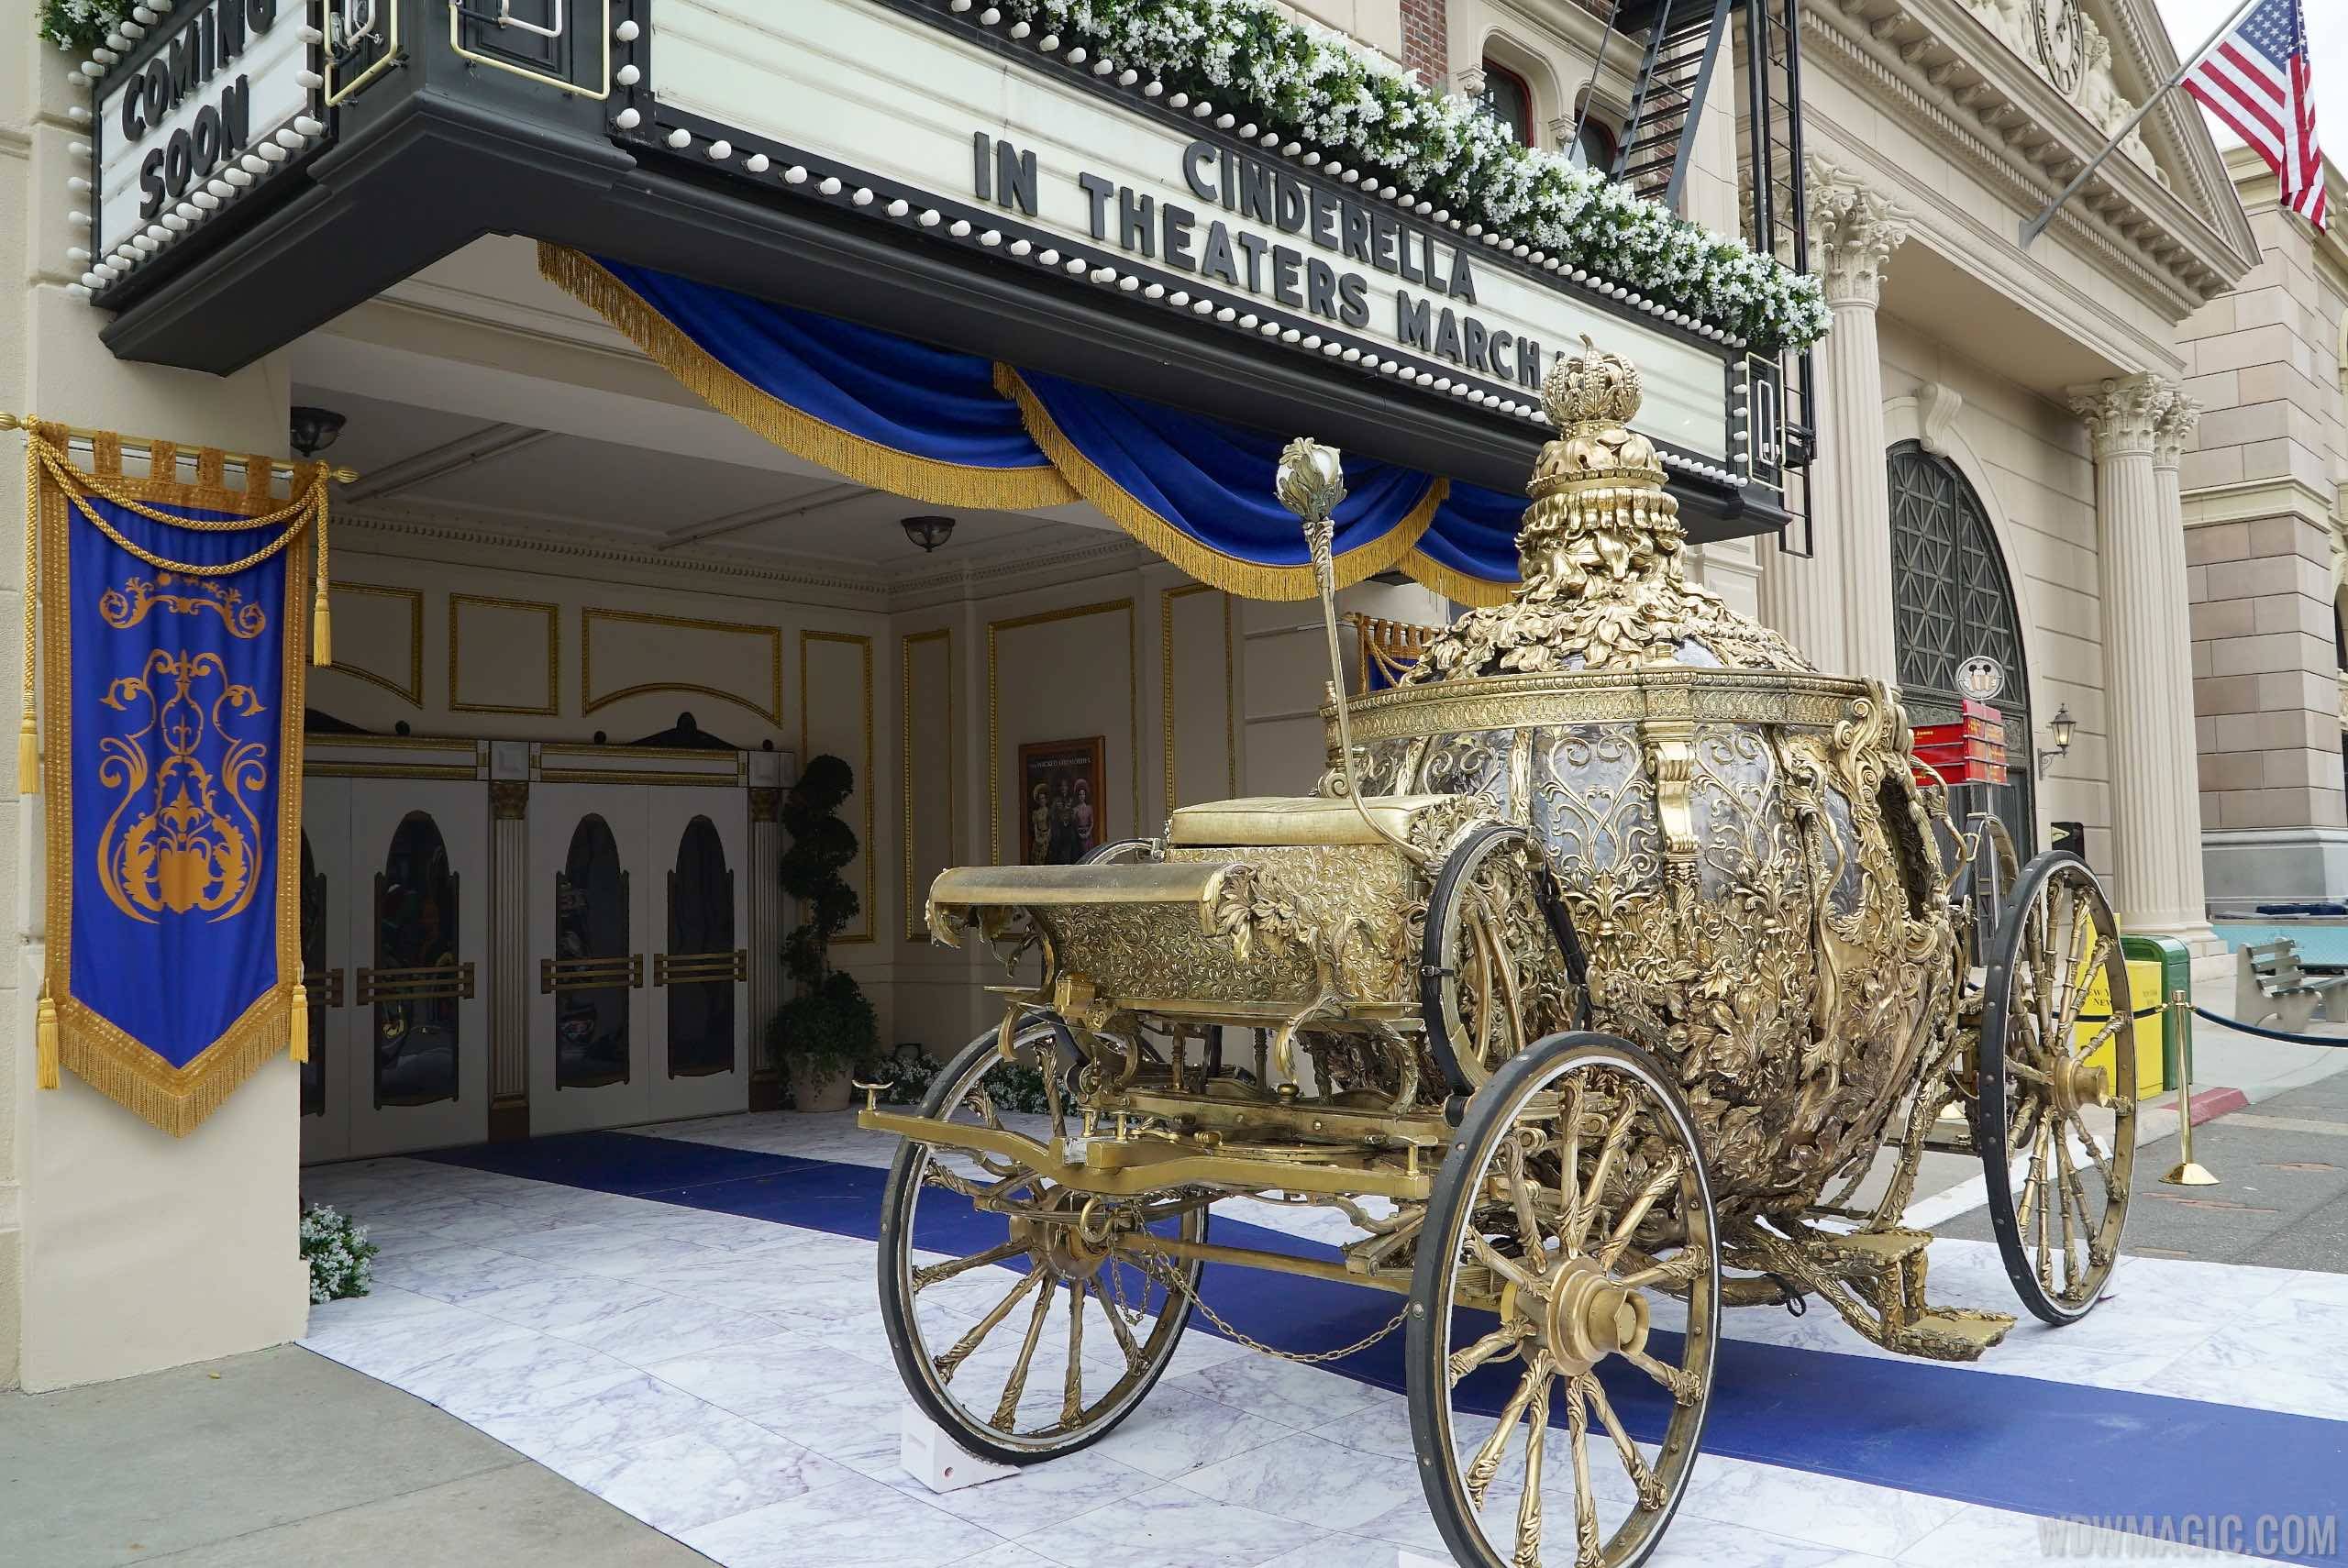 PHOTOS - Golden Coach prop from the upcoming 'Cinderella' movie now on display at Disney's Hollywood Studios